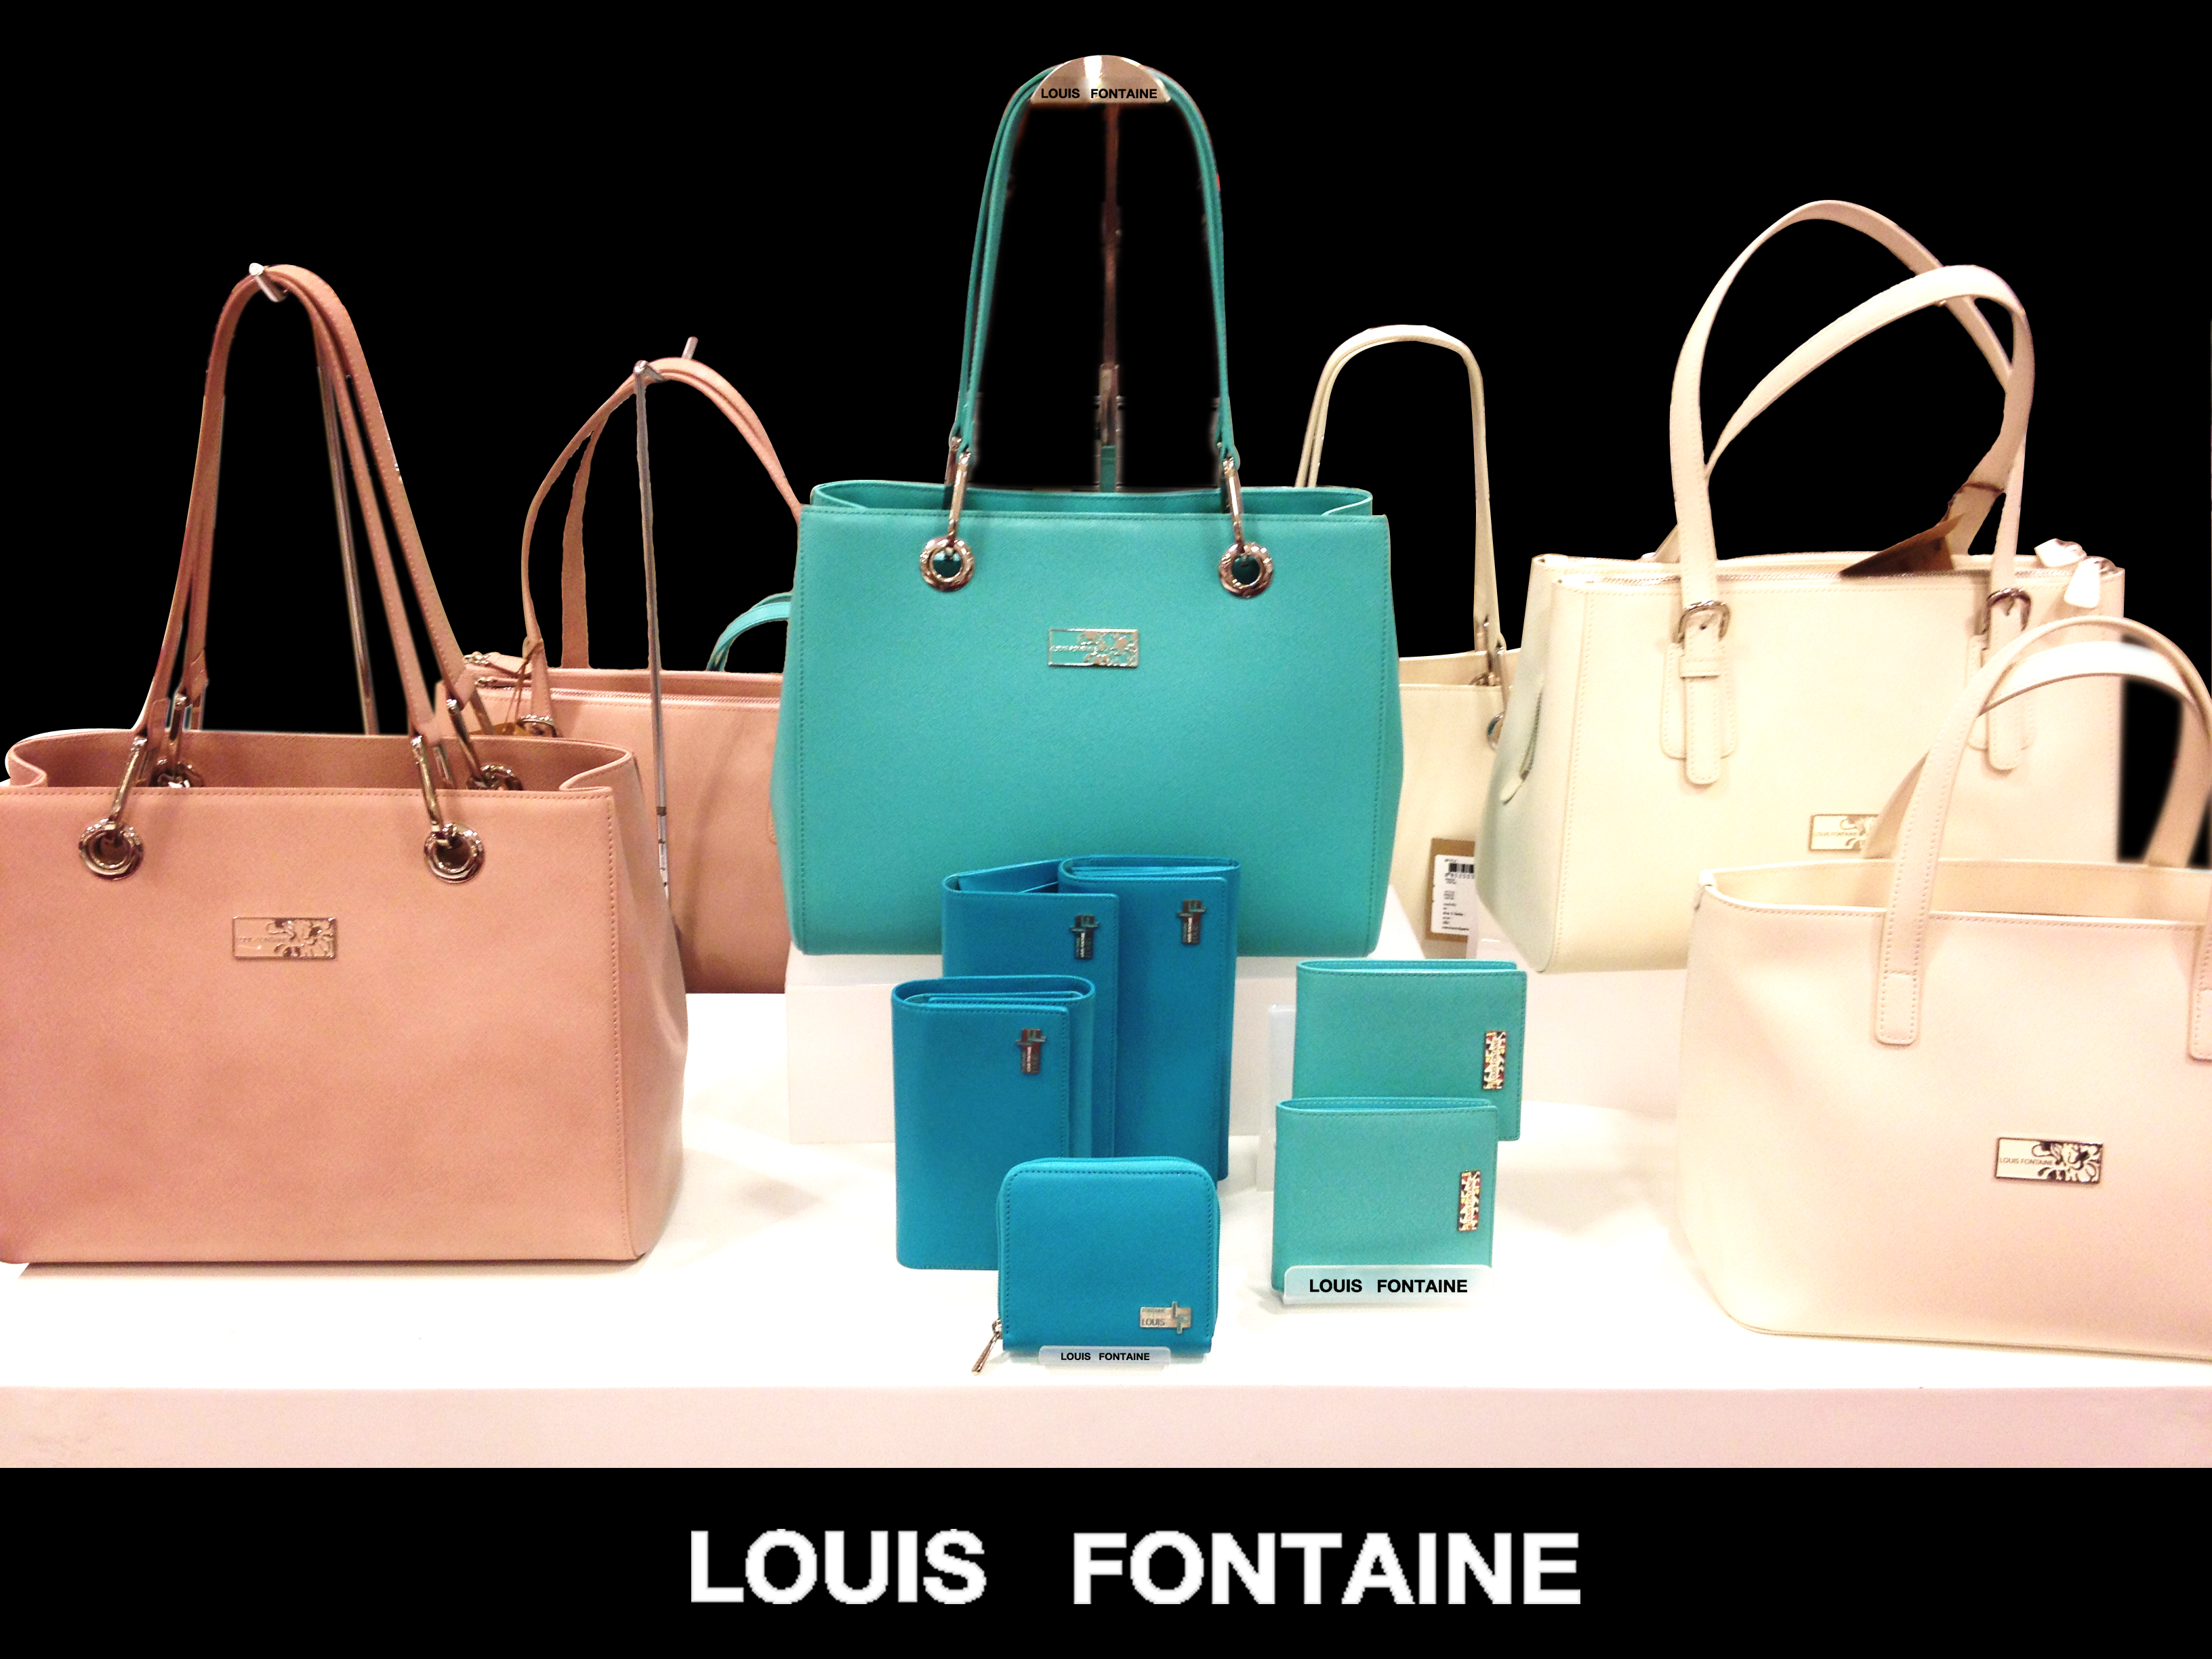 LOUISE FONTAINE, Bags